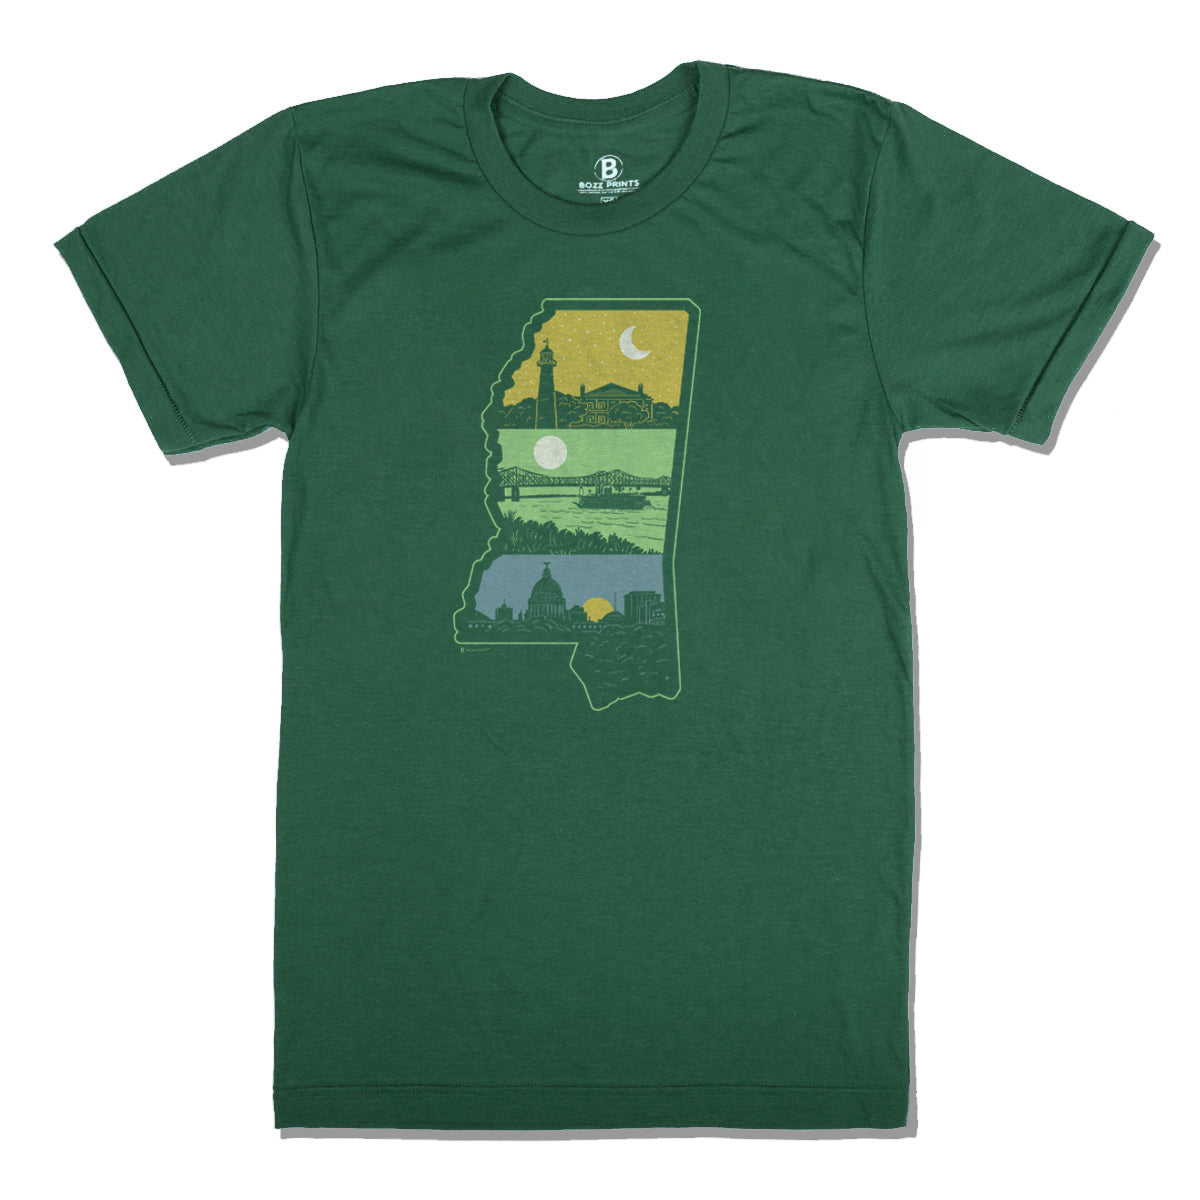 Layers of Mississippi T-Shirt